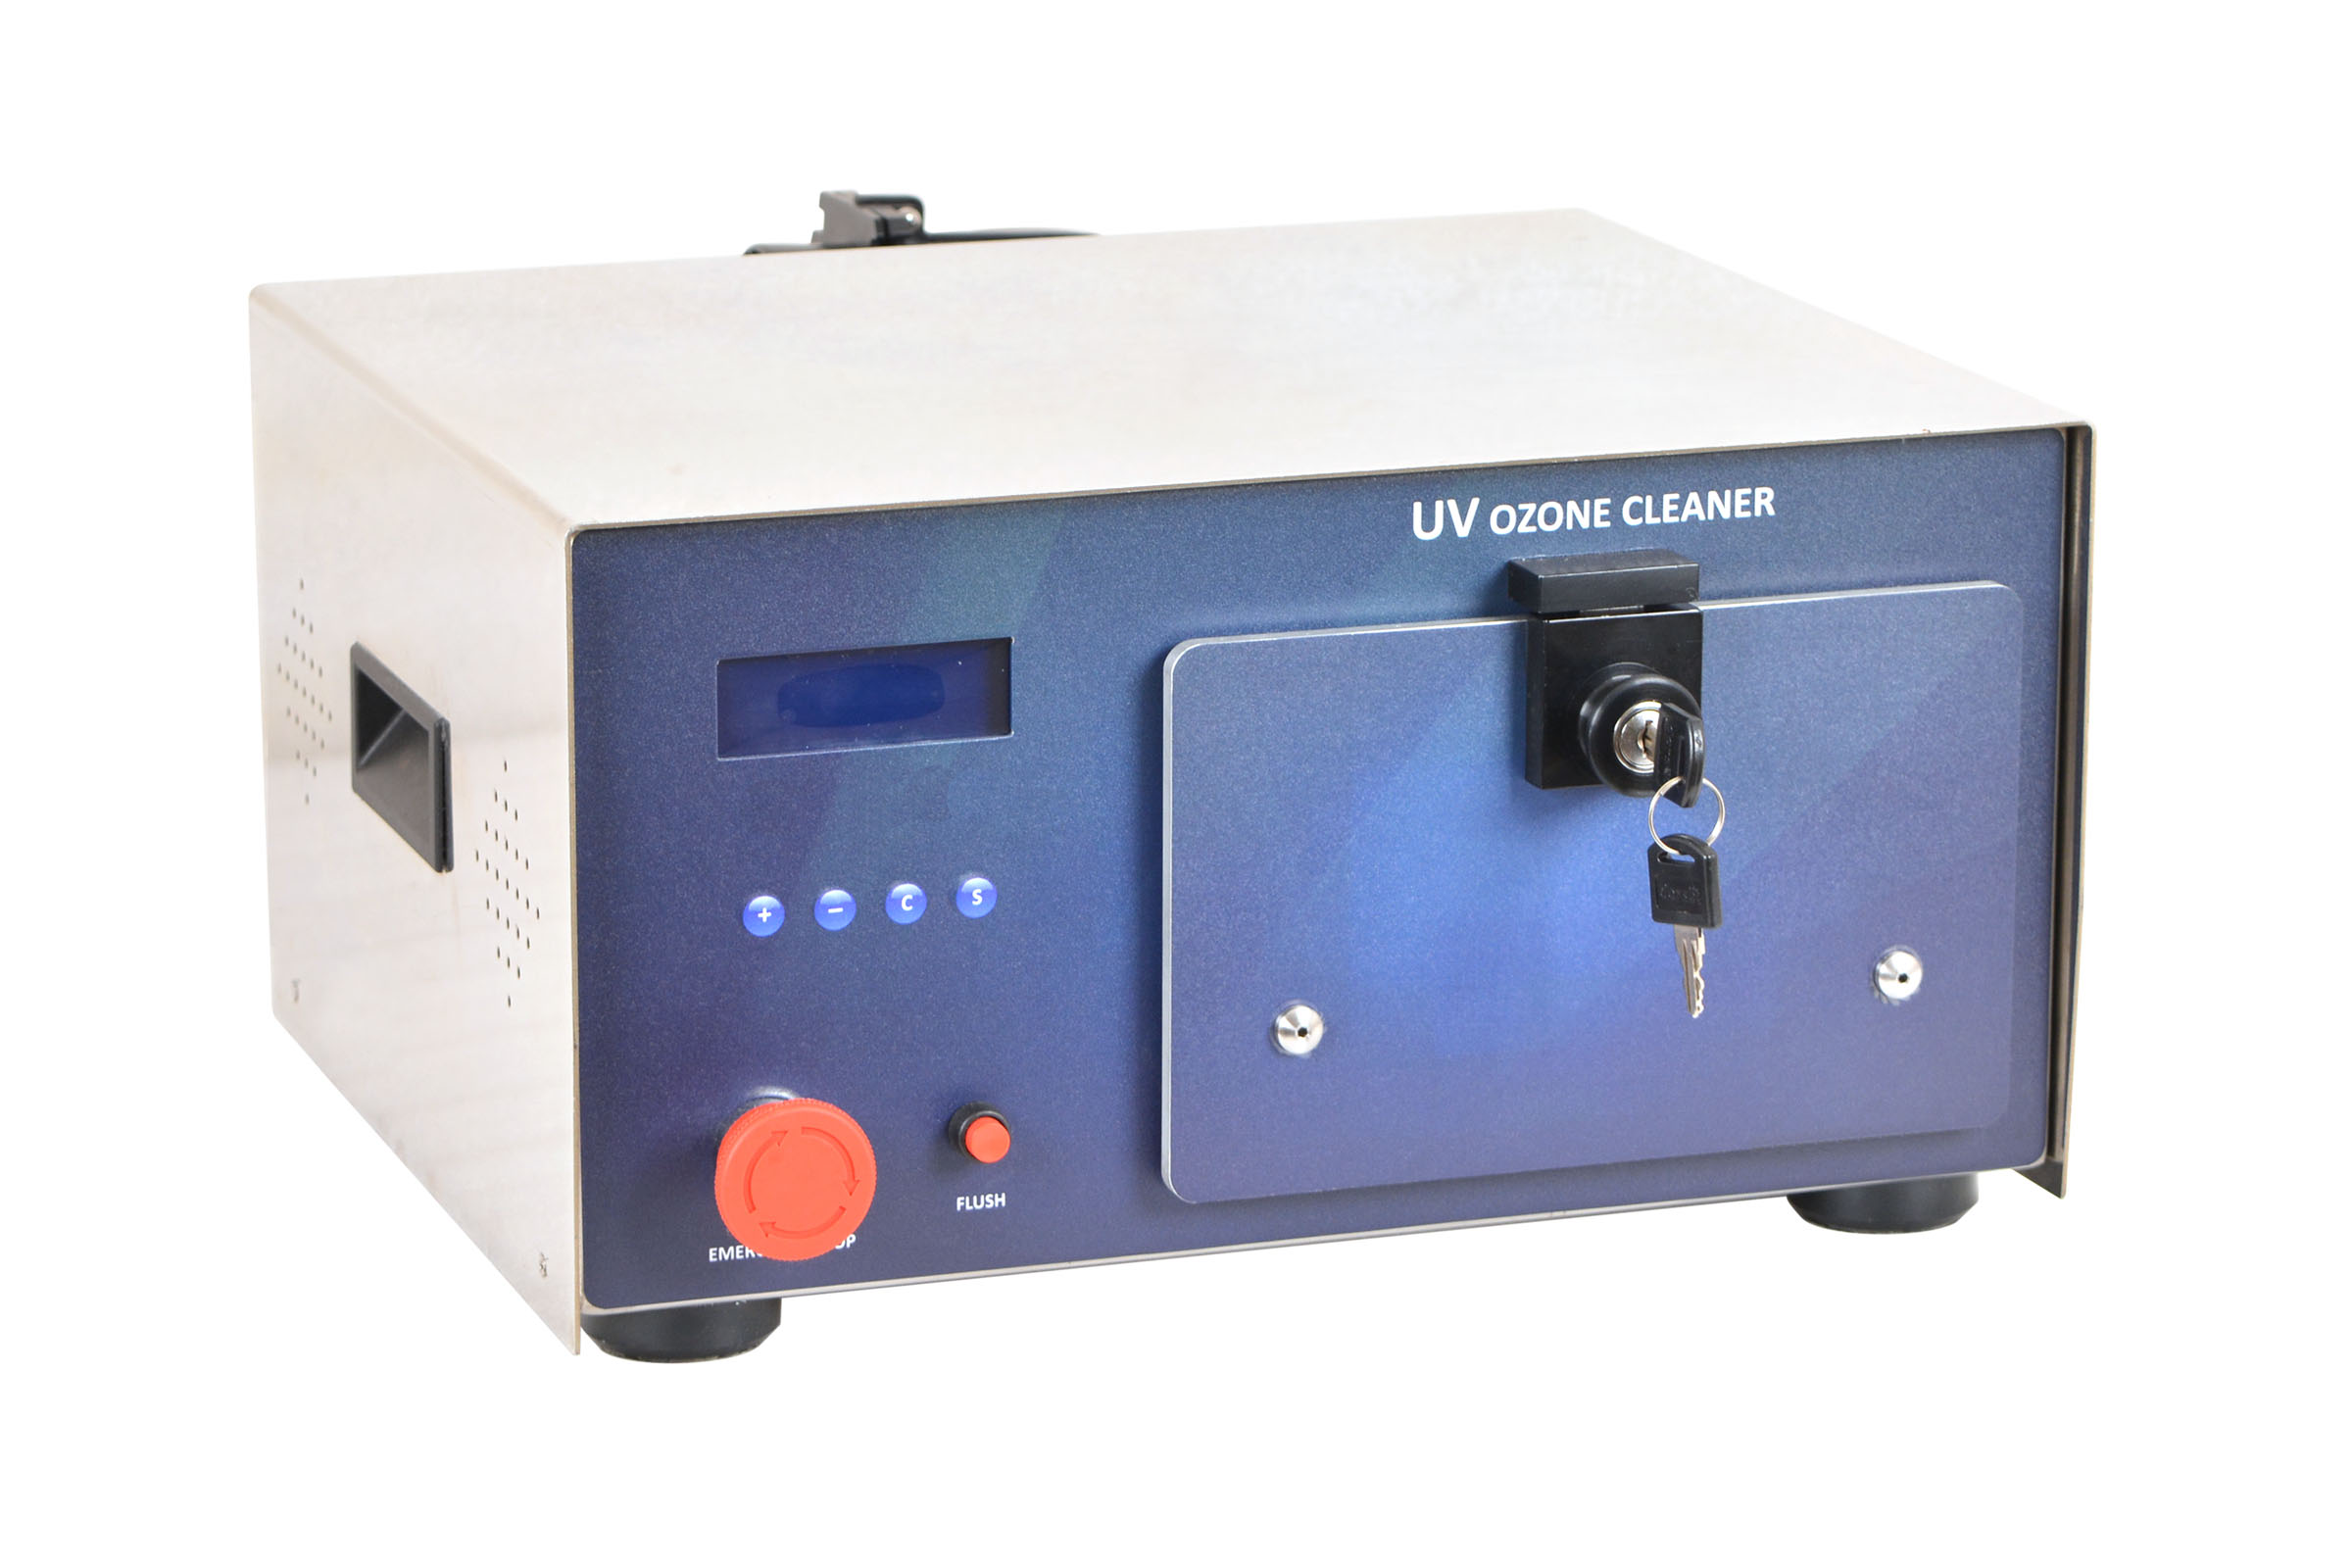 Mechanism and Effects of Ultraviolet Ozone Cleaning Machine